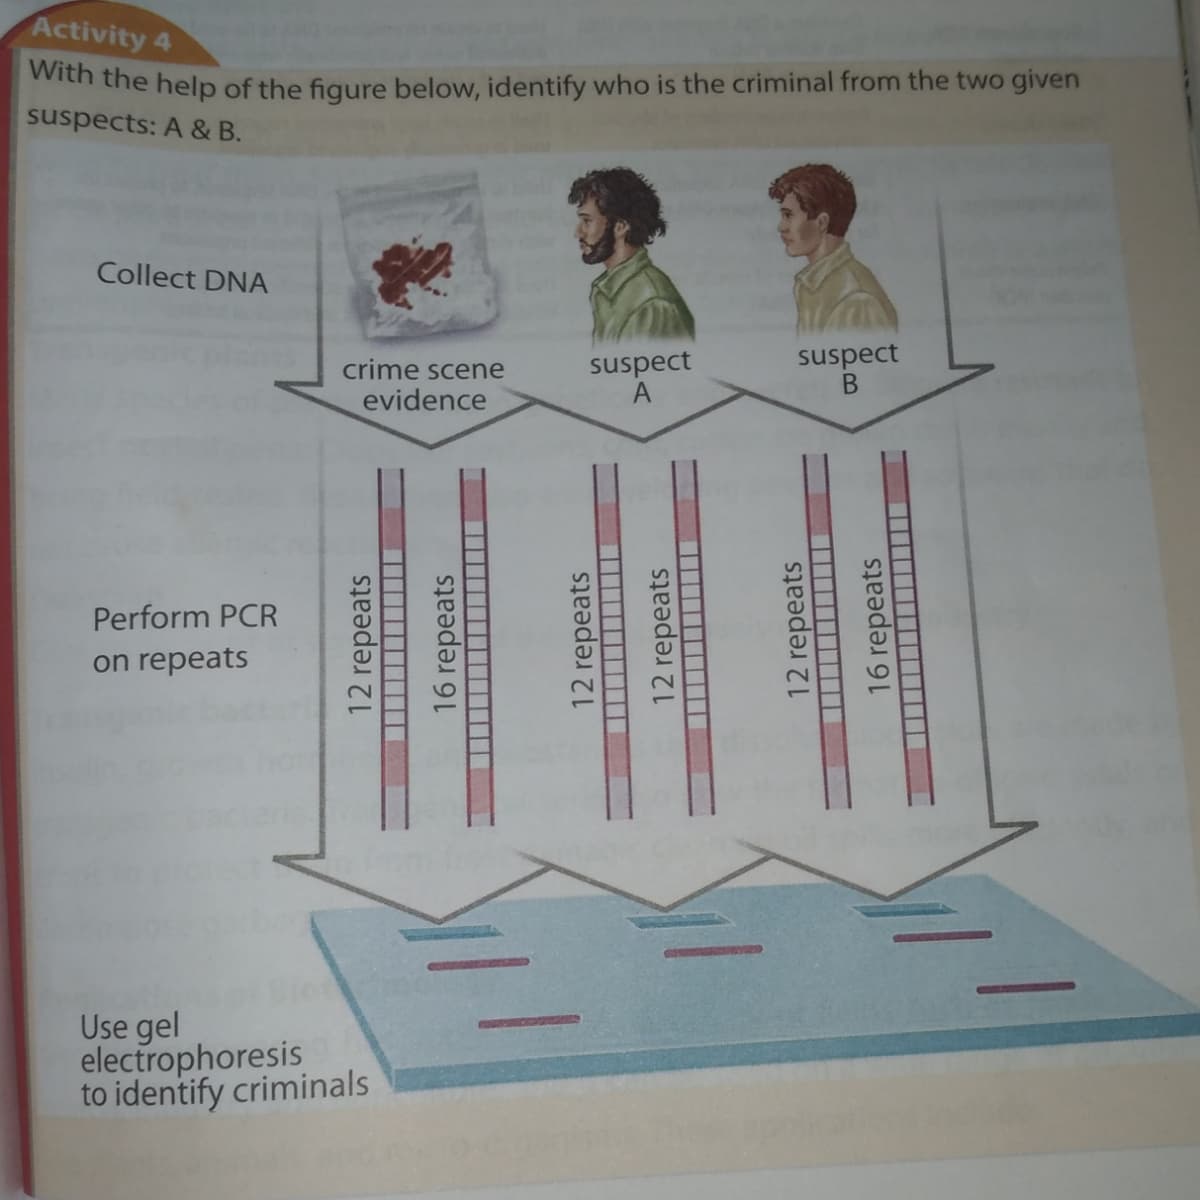 Activity 4
en the help of the figure below, identify who is the criminal from the two given
suspects: A & B.
Collect DNA
suspect
suspect
A
crime scene
evidence
Perform PCR
on repeats
Use gel
electrophoresis
to identify criminals
12 repeats
16 repeats
12 repeats
12 repeats
12 repeats
16 repeats
